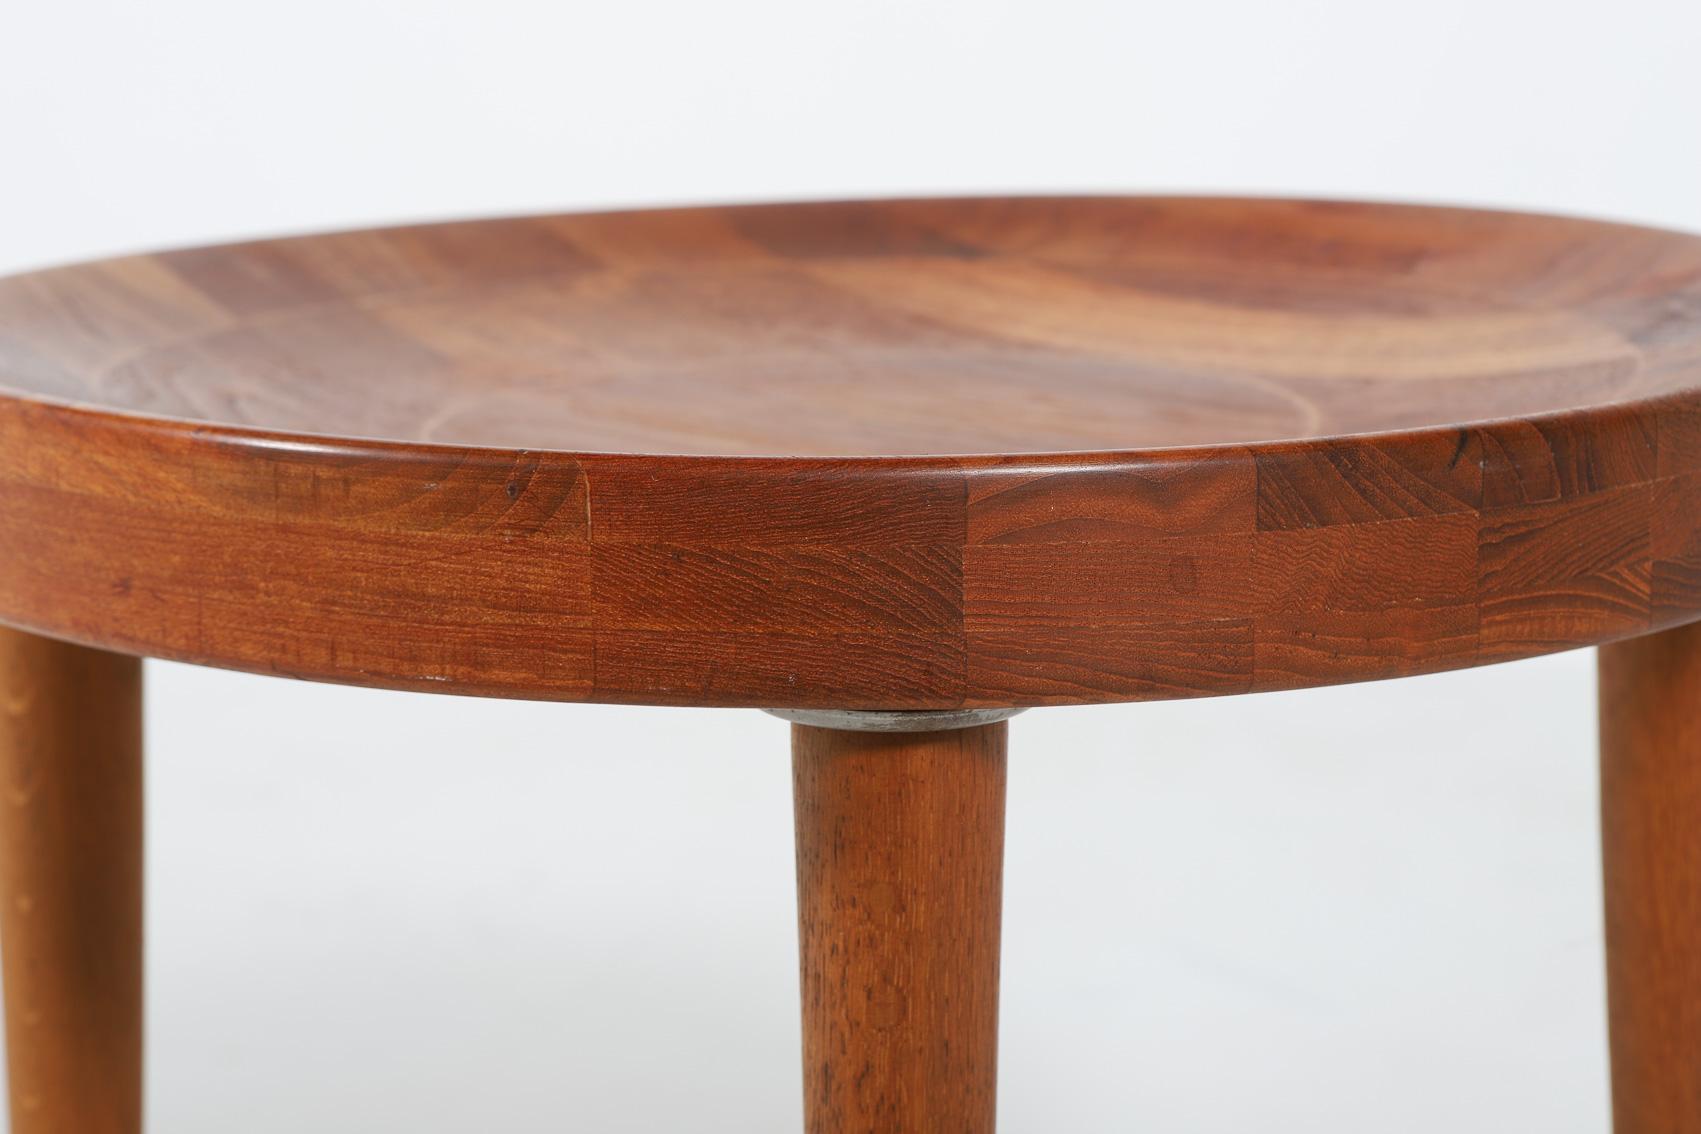 20th Century Danish Modern side table from Jens Harald Quistgaard, 1950’s